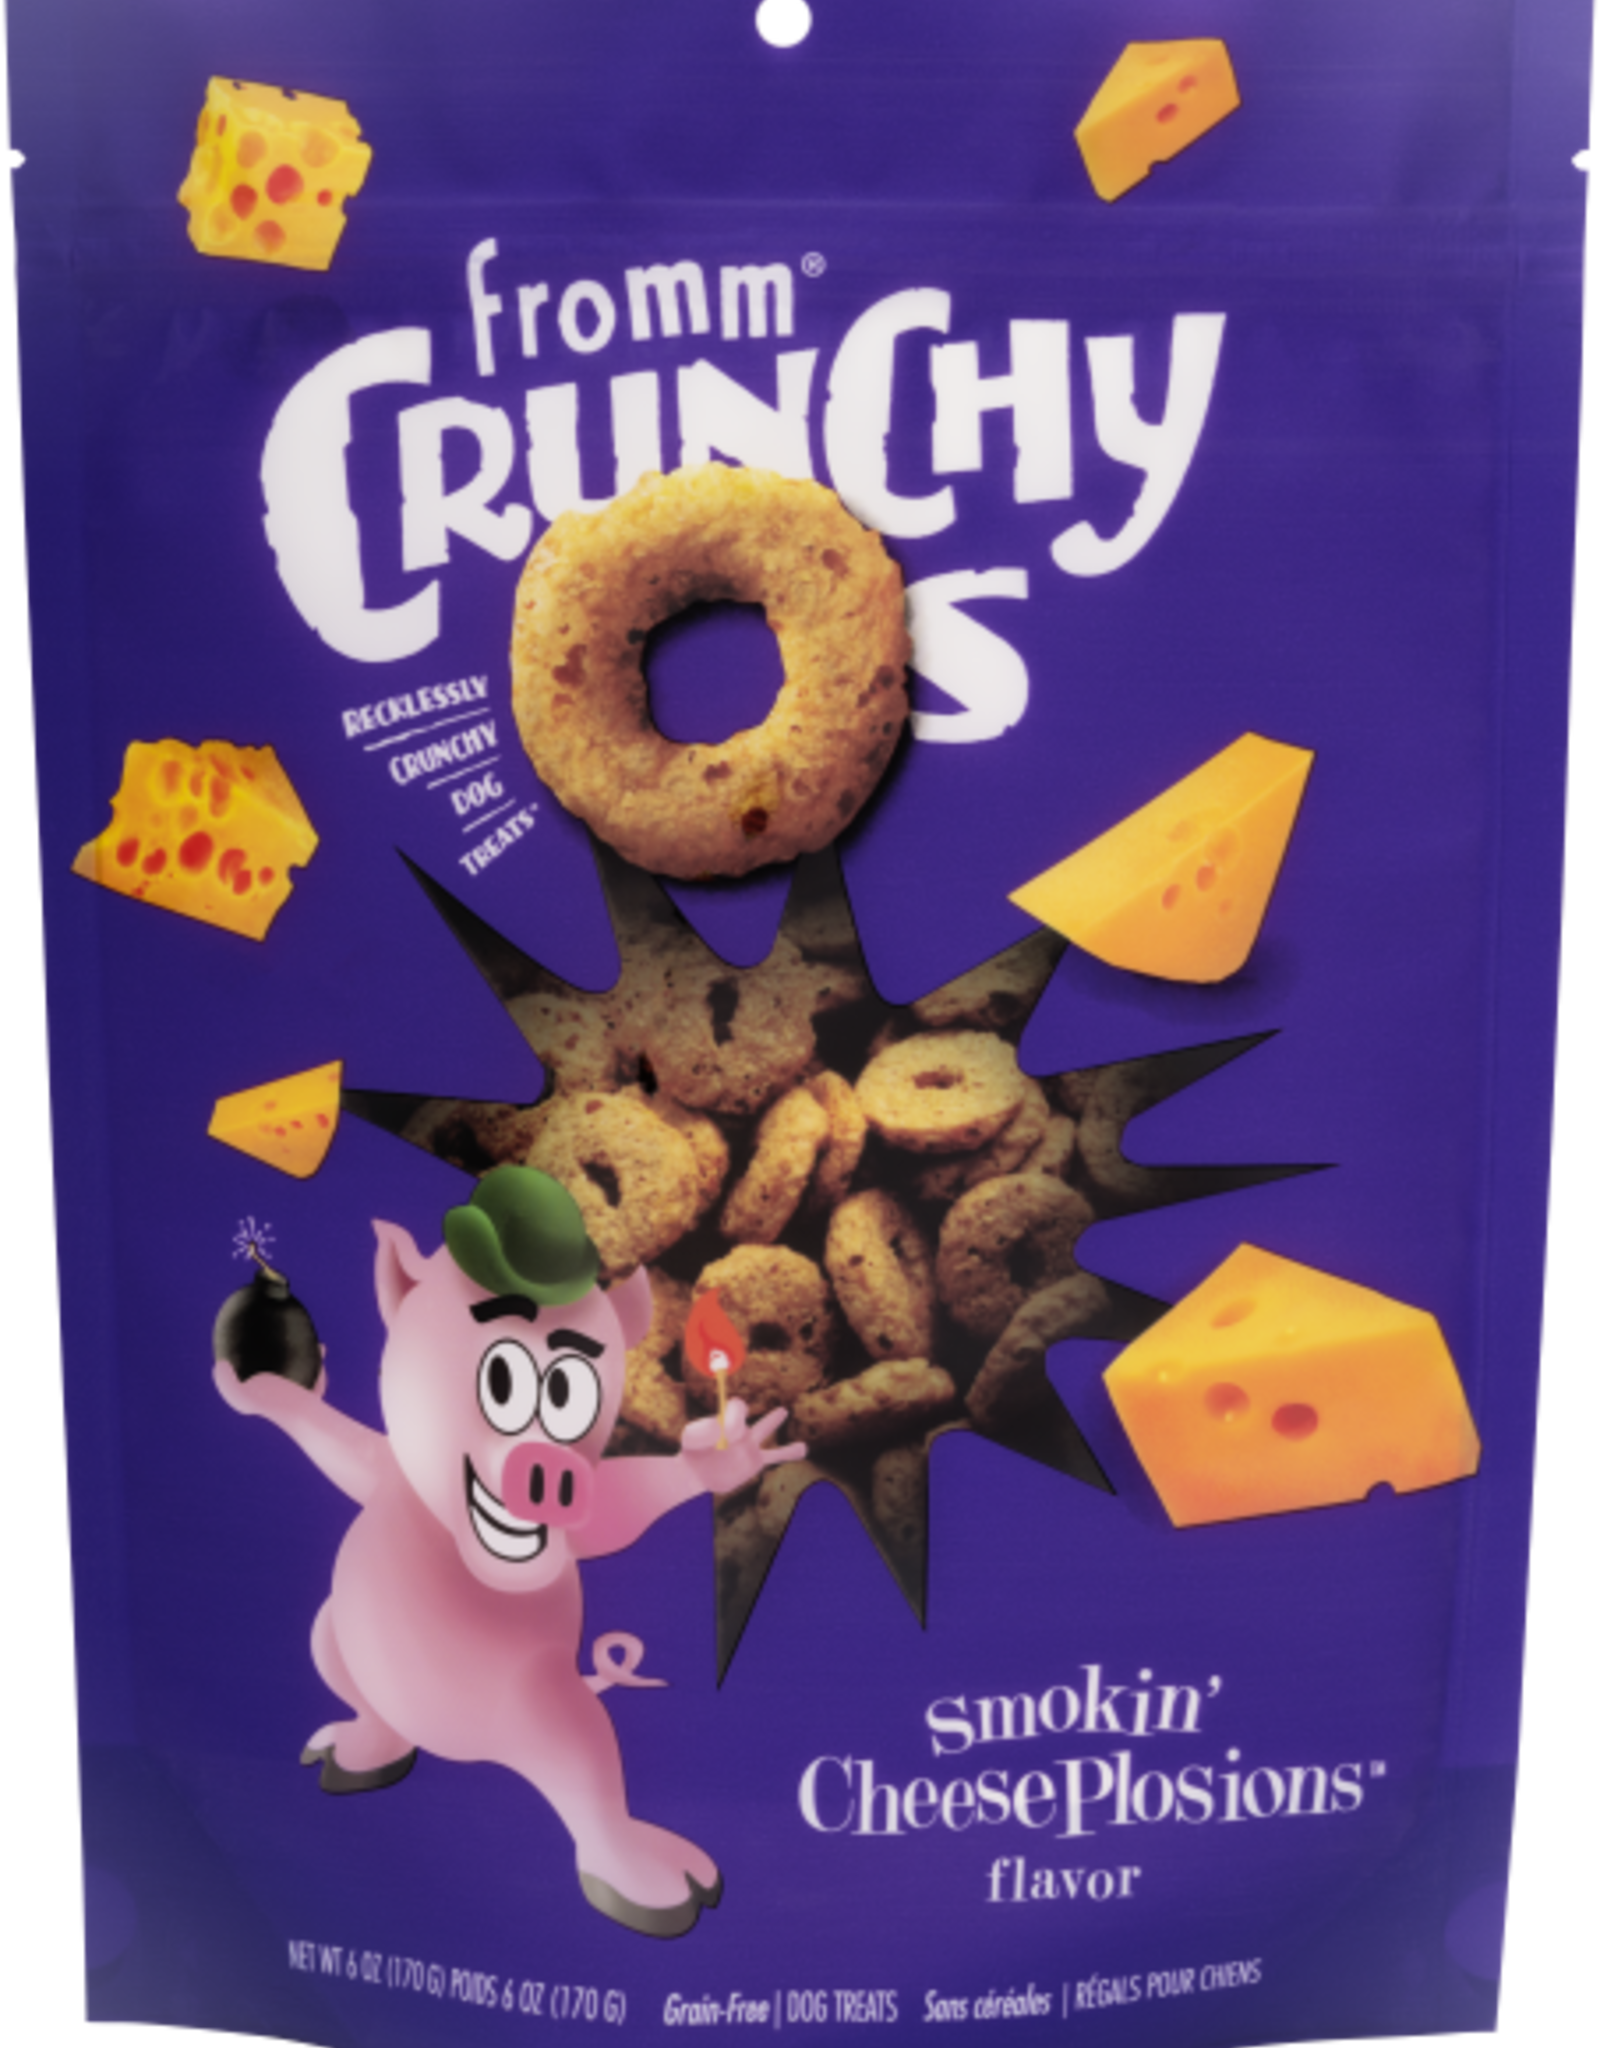 Fromm Fromm Crunchy o's  - Smokin' CheesePlosions 6 oz